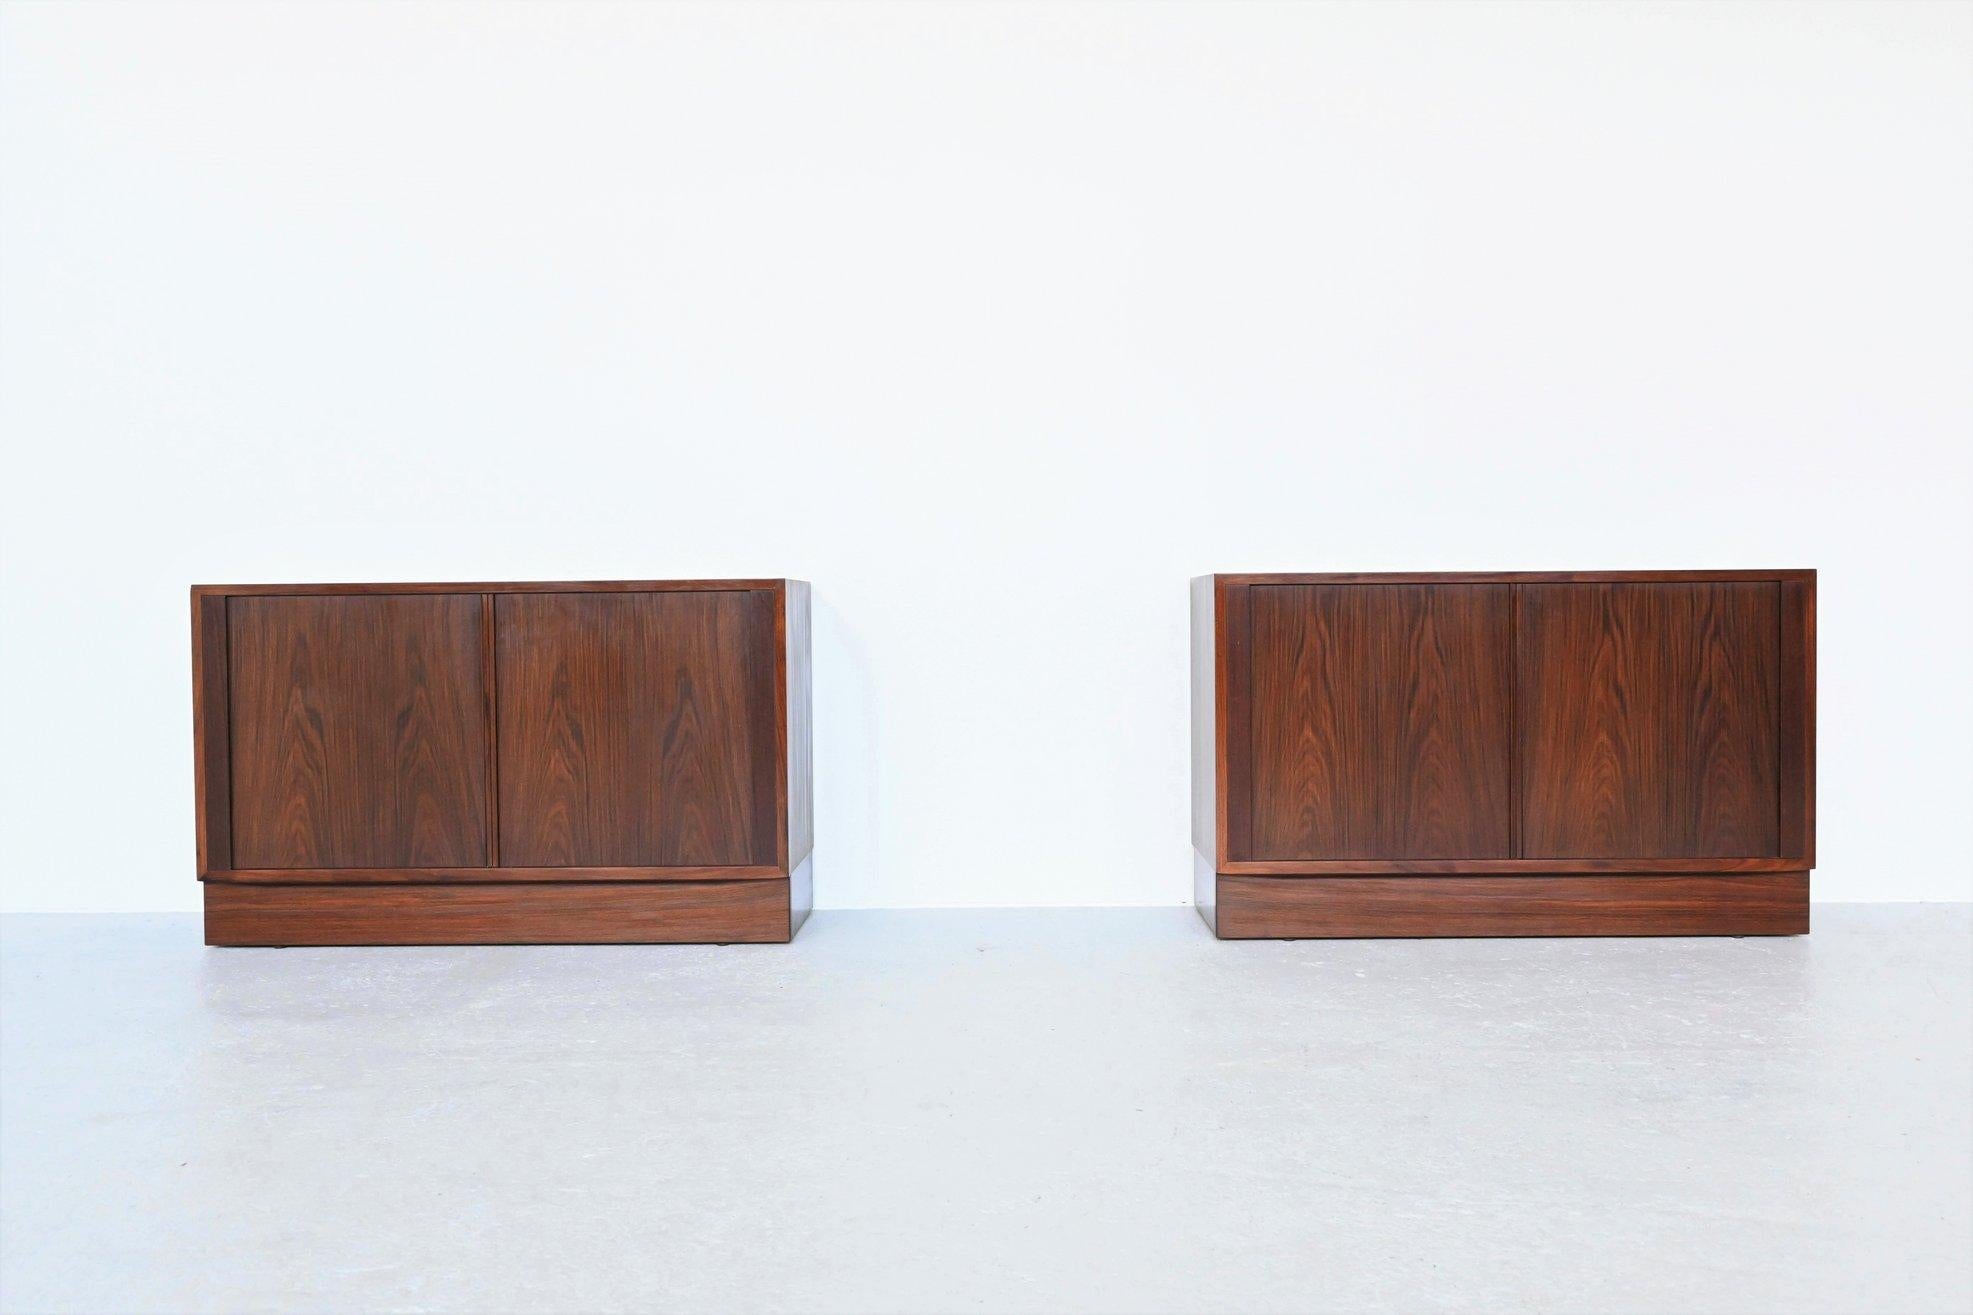 Nice pair of cabinets designed by Carlo Jensen and manufactured by Hundevad & Co, Denmark 1960. They are made of beautiful grained rosewood and have very nice sliding tambour doors with adjustable interior shelving and a drawer behind. The cabinets